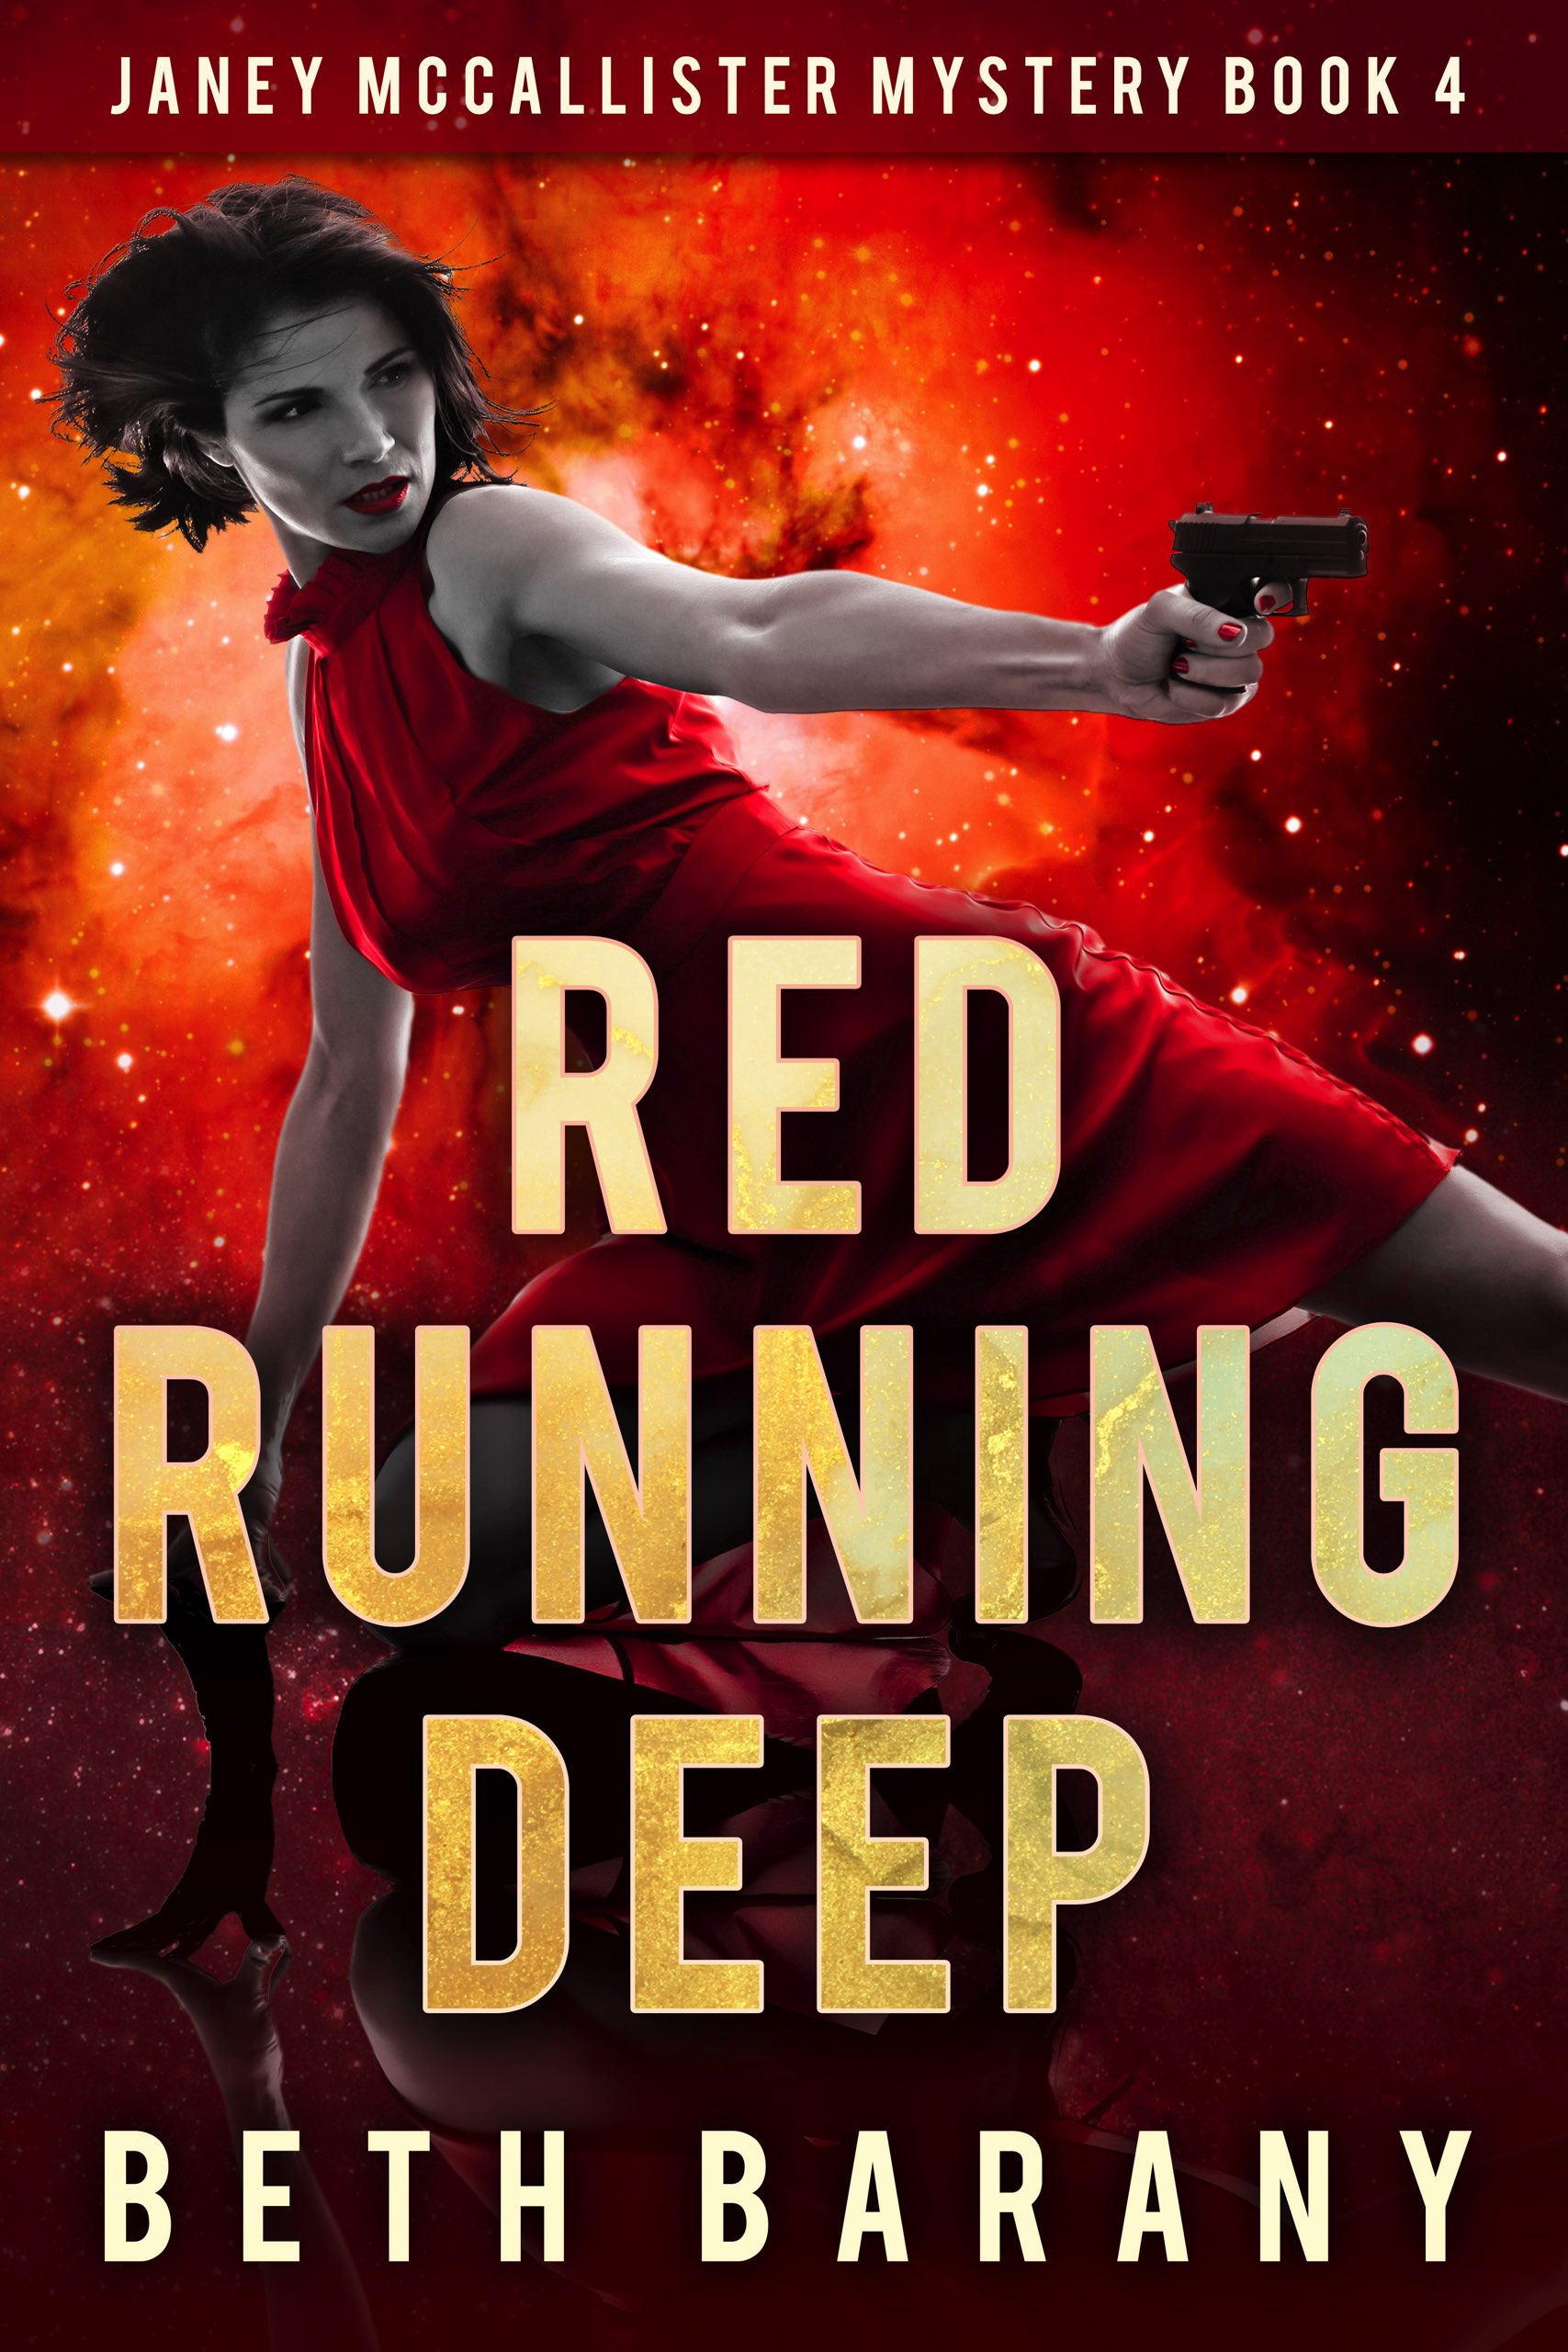 Red Running Deep, Book 4 in the Janey McCallister Mystery series